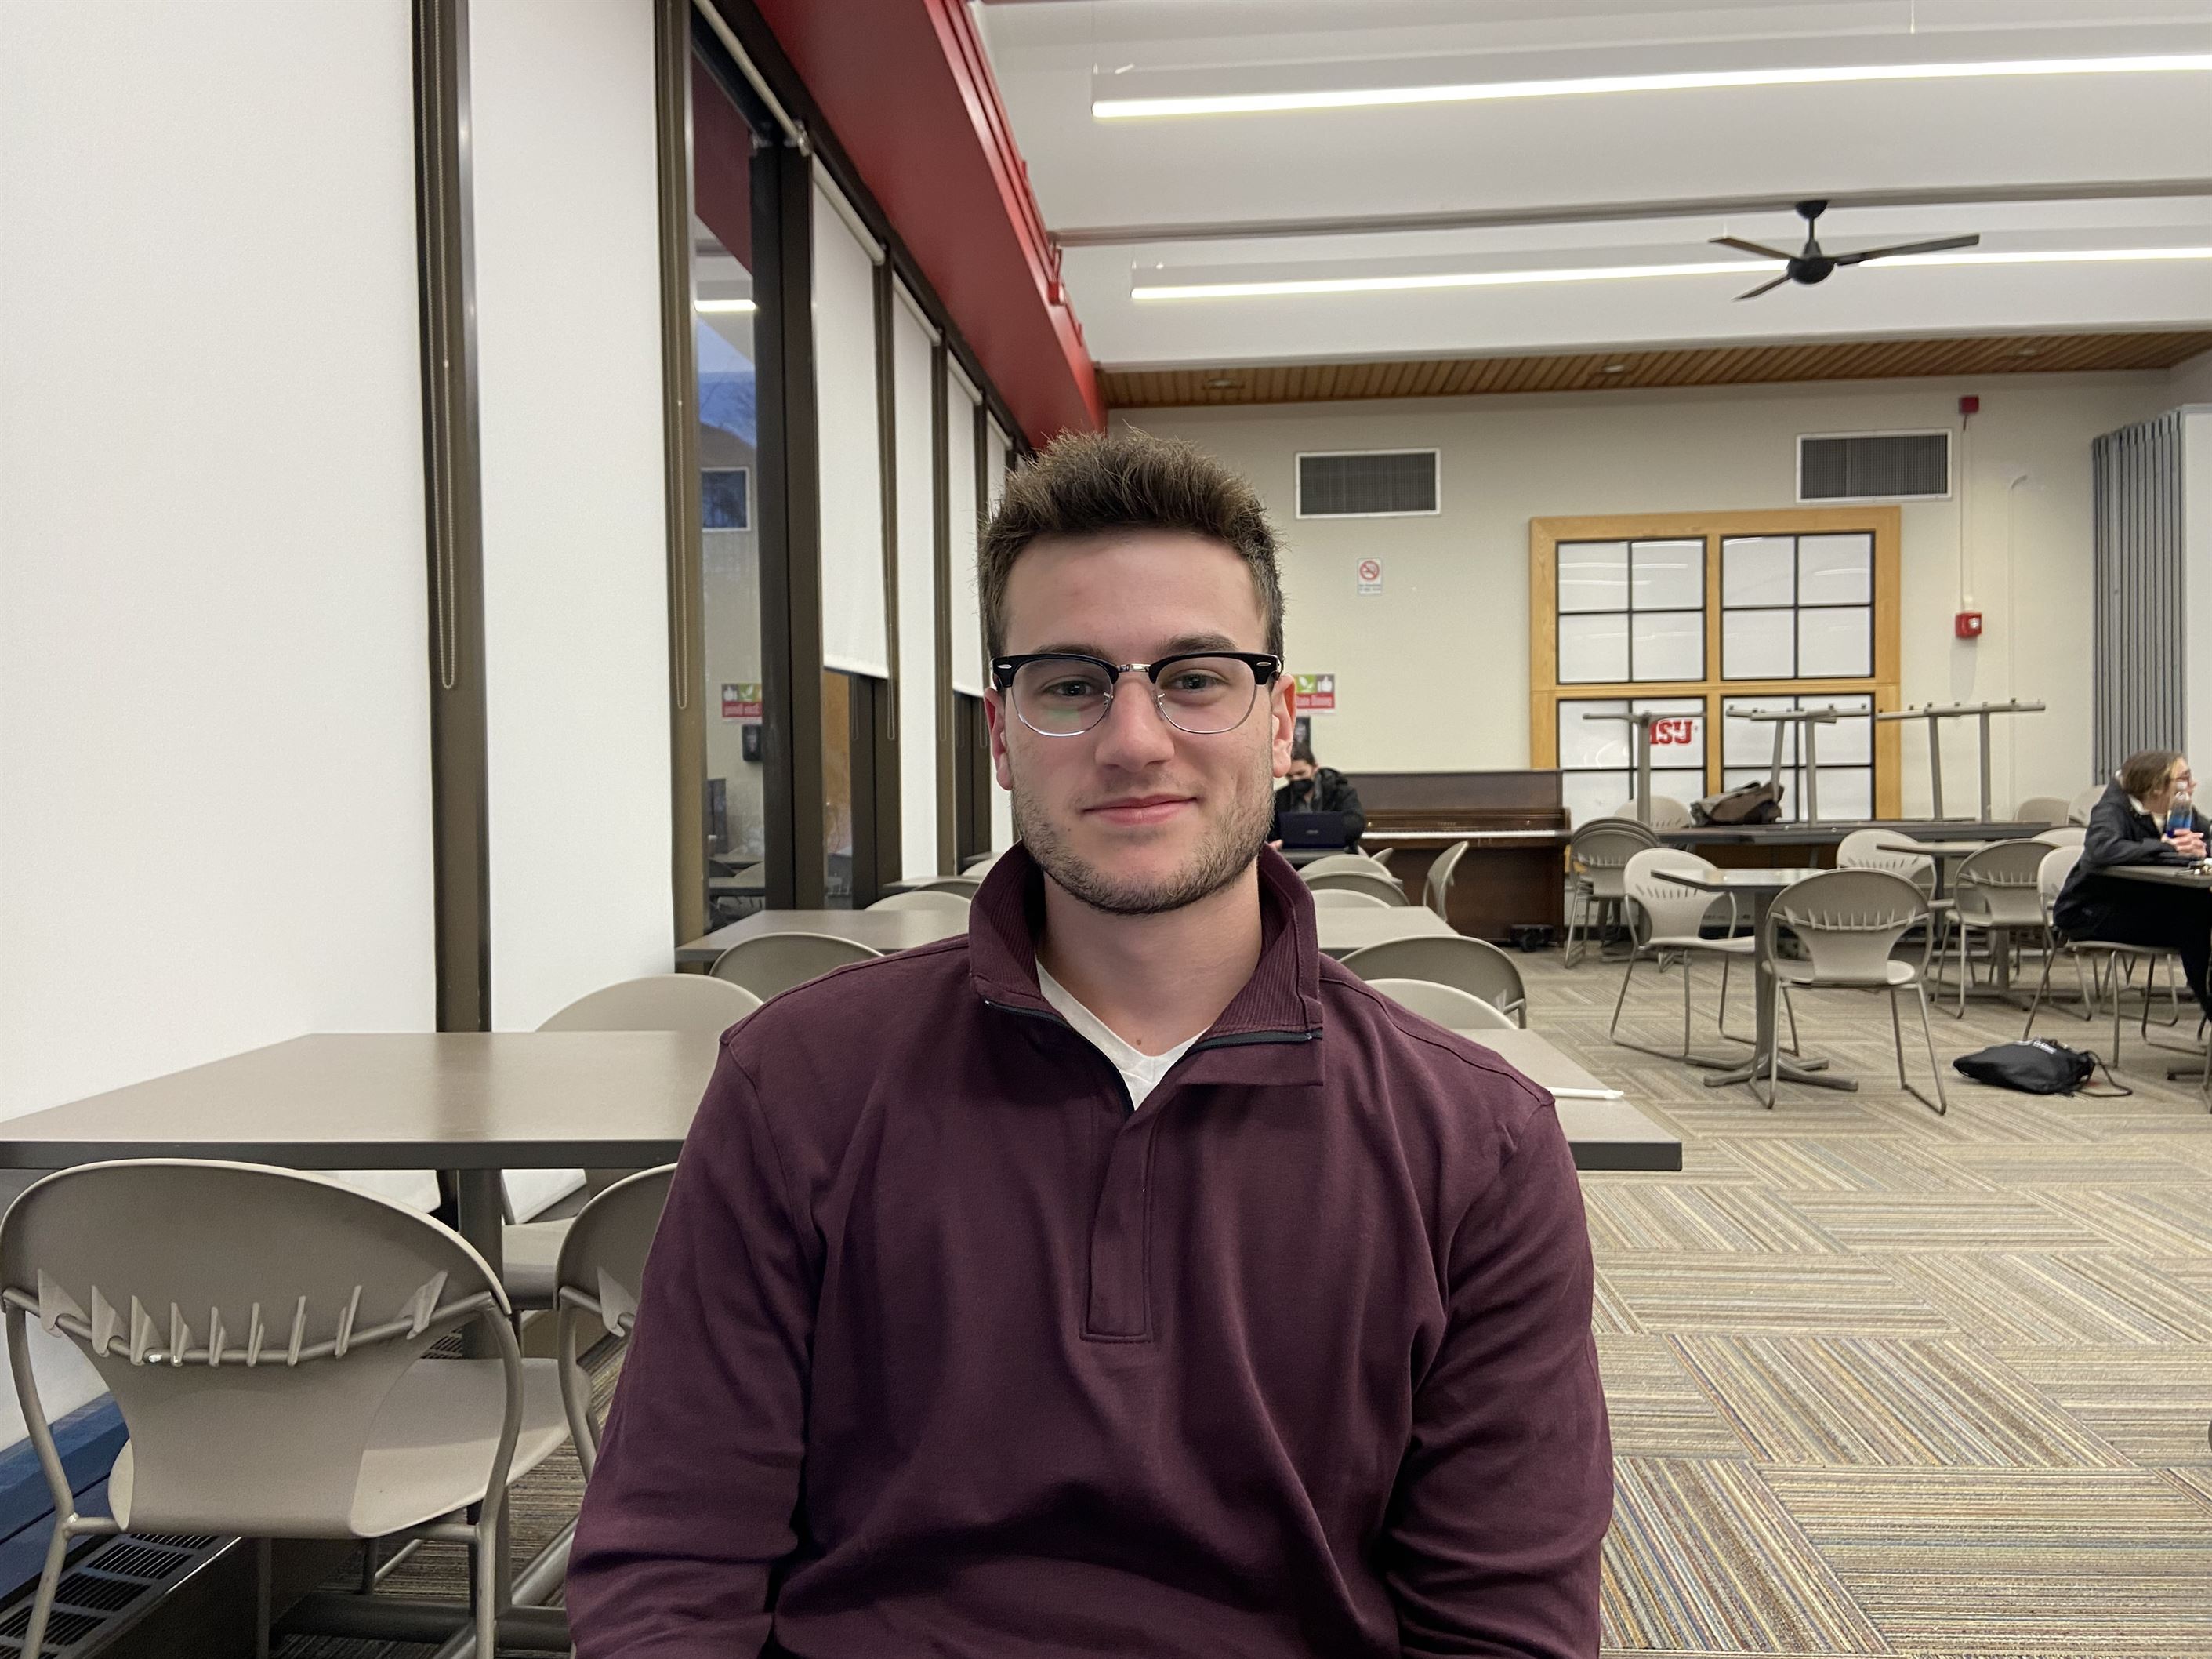 Anthony Rota, a senior business administration major with concentrations in marketing and management, did not notice the effects of the time shift as considerably.